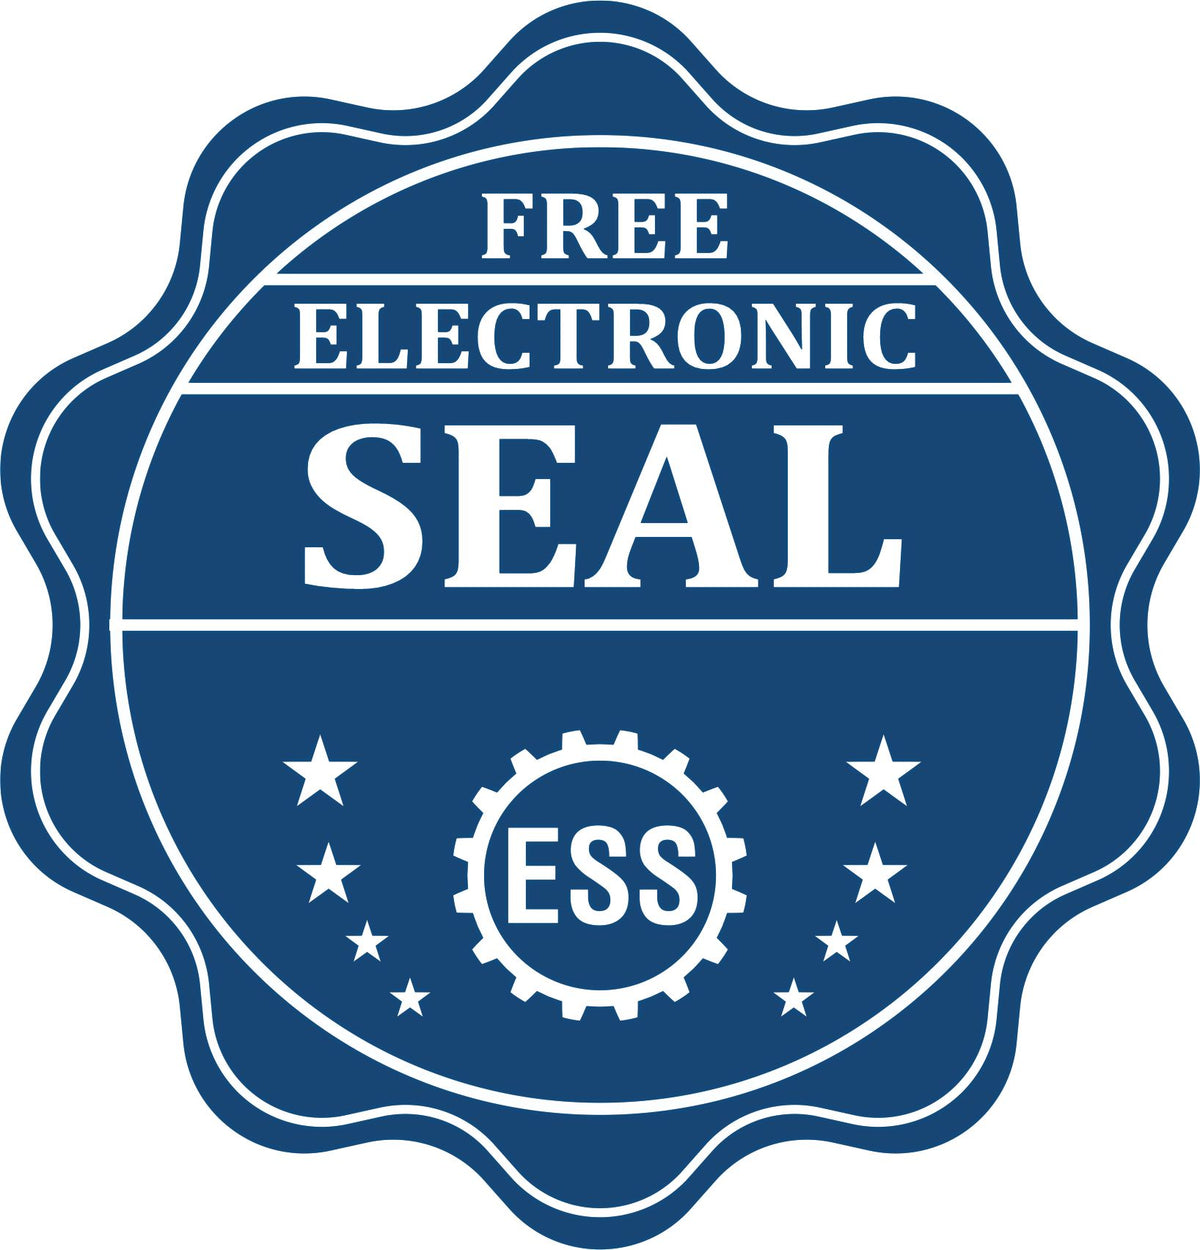 A badge showing a free electronic seal for the Slim Pre-Inked Missouri Landscape Architect Seal Stamp with stars and the ESS gear on the emblem.